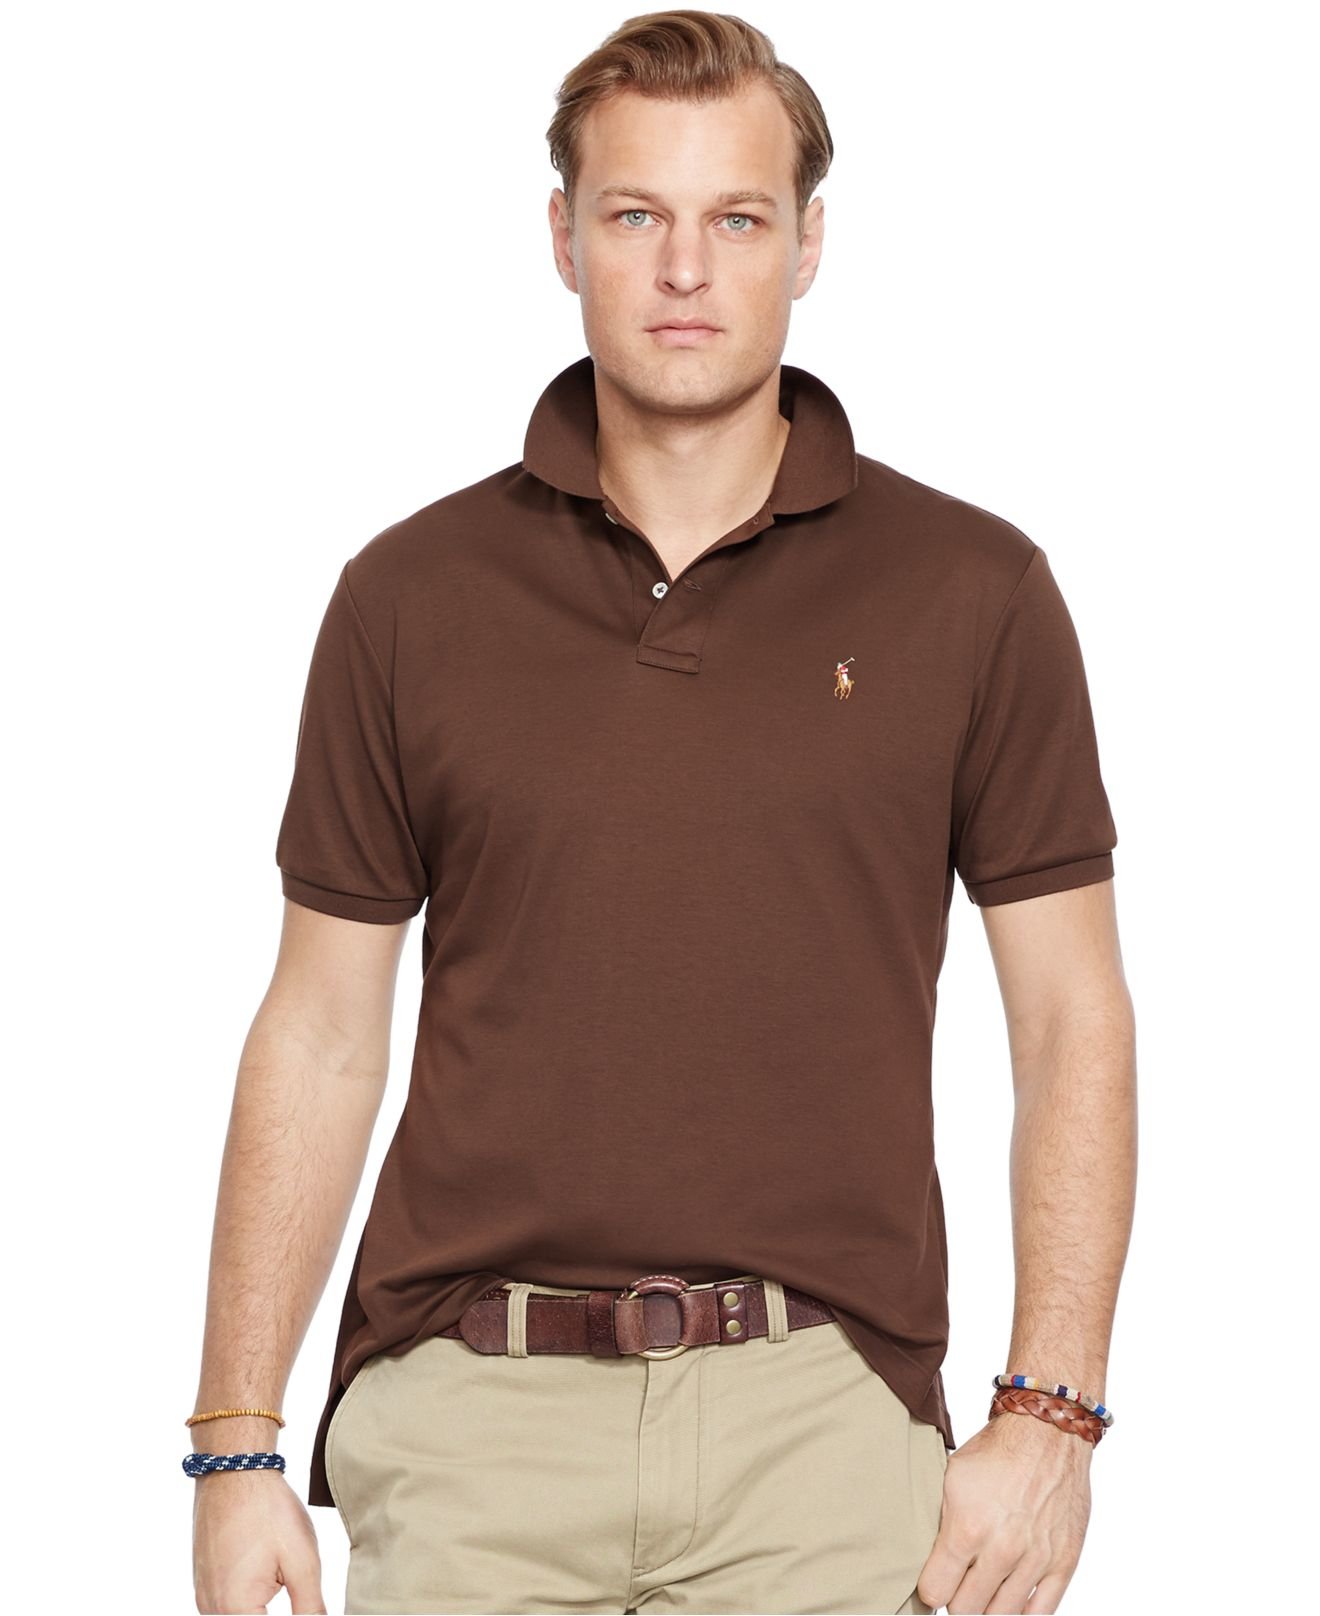 Lyst - Polo ralph lauren Big And Tall Pima Soft-touch Polo Shirt in